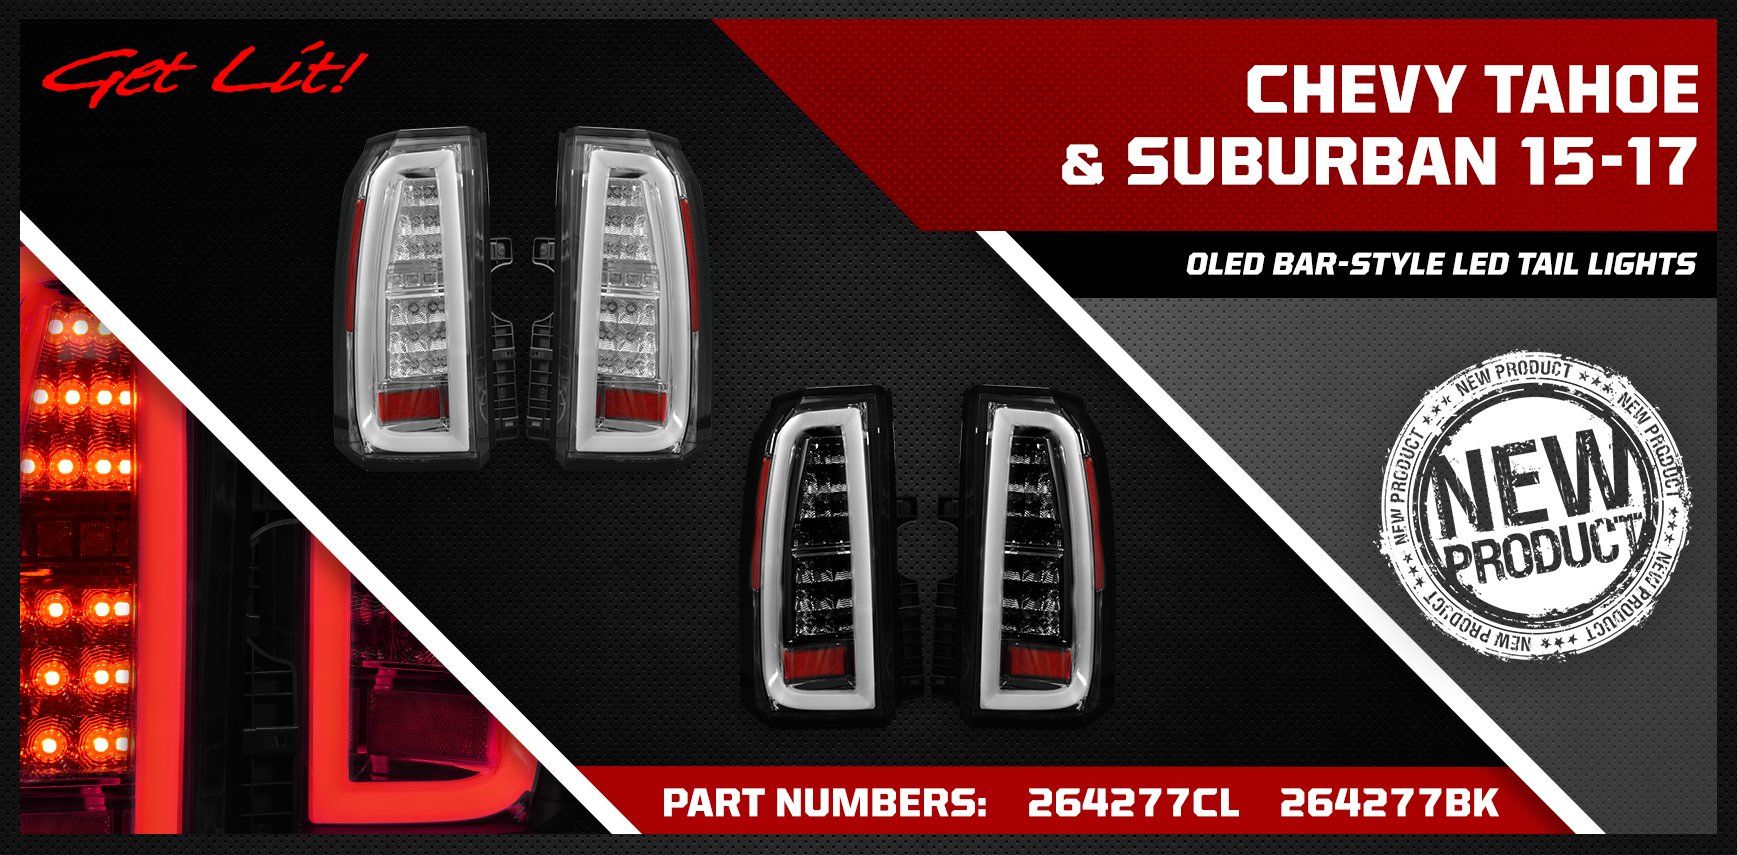 Chevy Tahoe &amp; Suburban 15-17 oled bar-style led tail lights banner